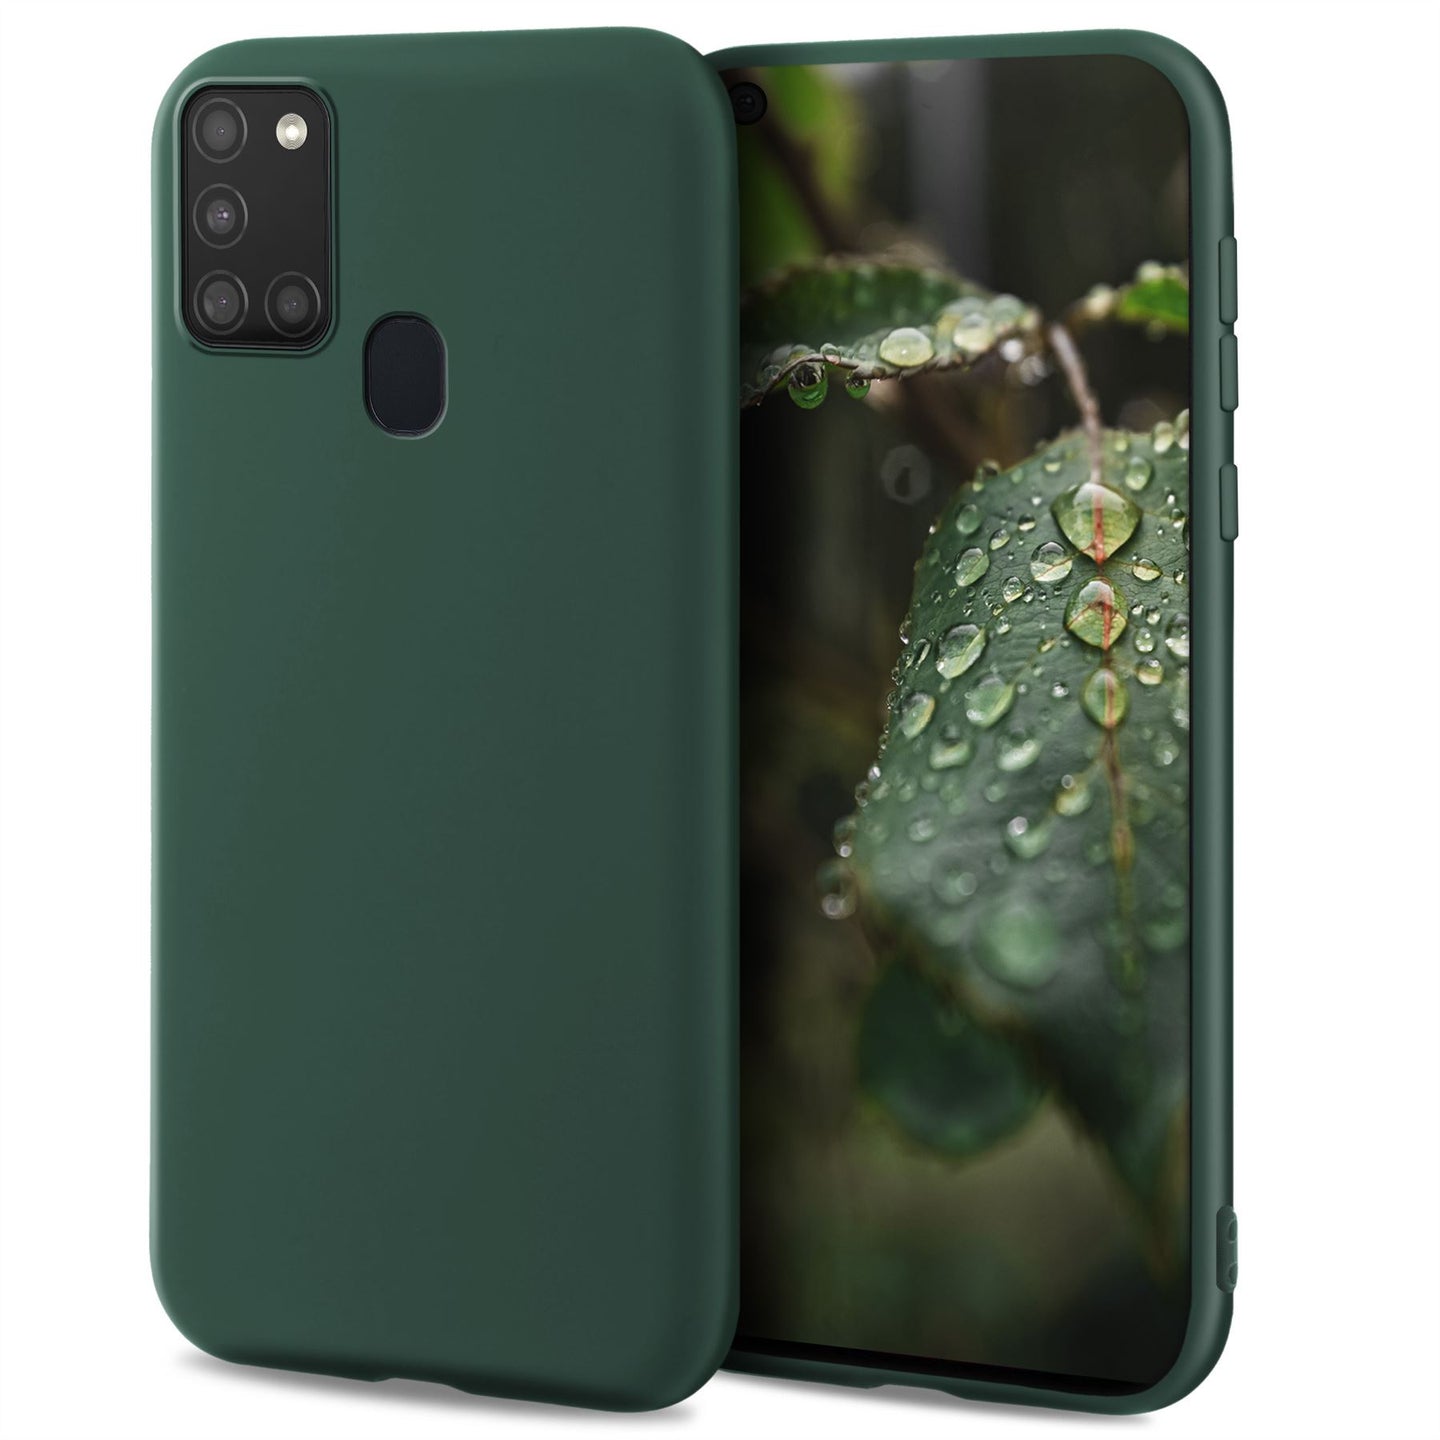 Moozy Lifestyle. Designed for Samsung A21s Case, Dark Green - Liquid Silicone Cover with Matte Finish and Soft Microfiber Lining